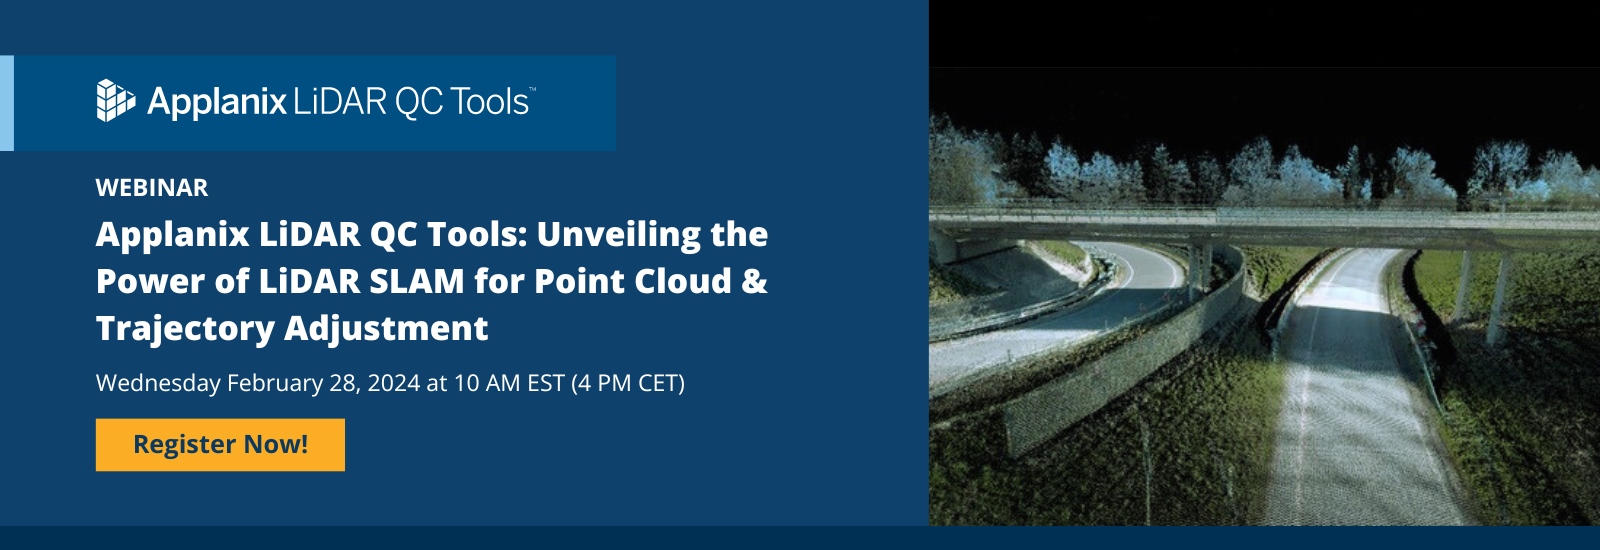 Join us for a webinar on Applanix LiDAR QC Tools: Unveiling the Power of LiDAR SLAM for Point Cloud & Trajectory Adjustment! | Wednesday February 28, 2024 at 10 AM EST (4 PM CET) | Register Now!